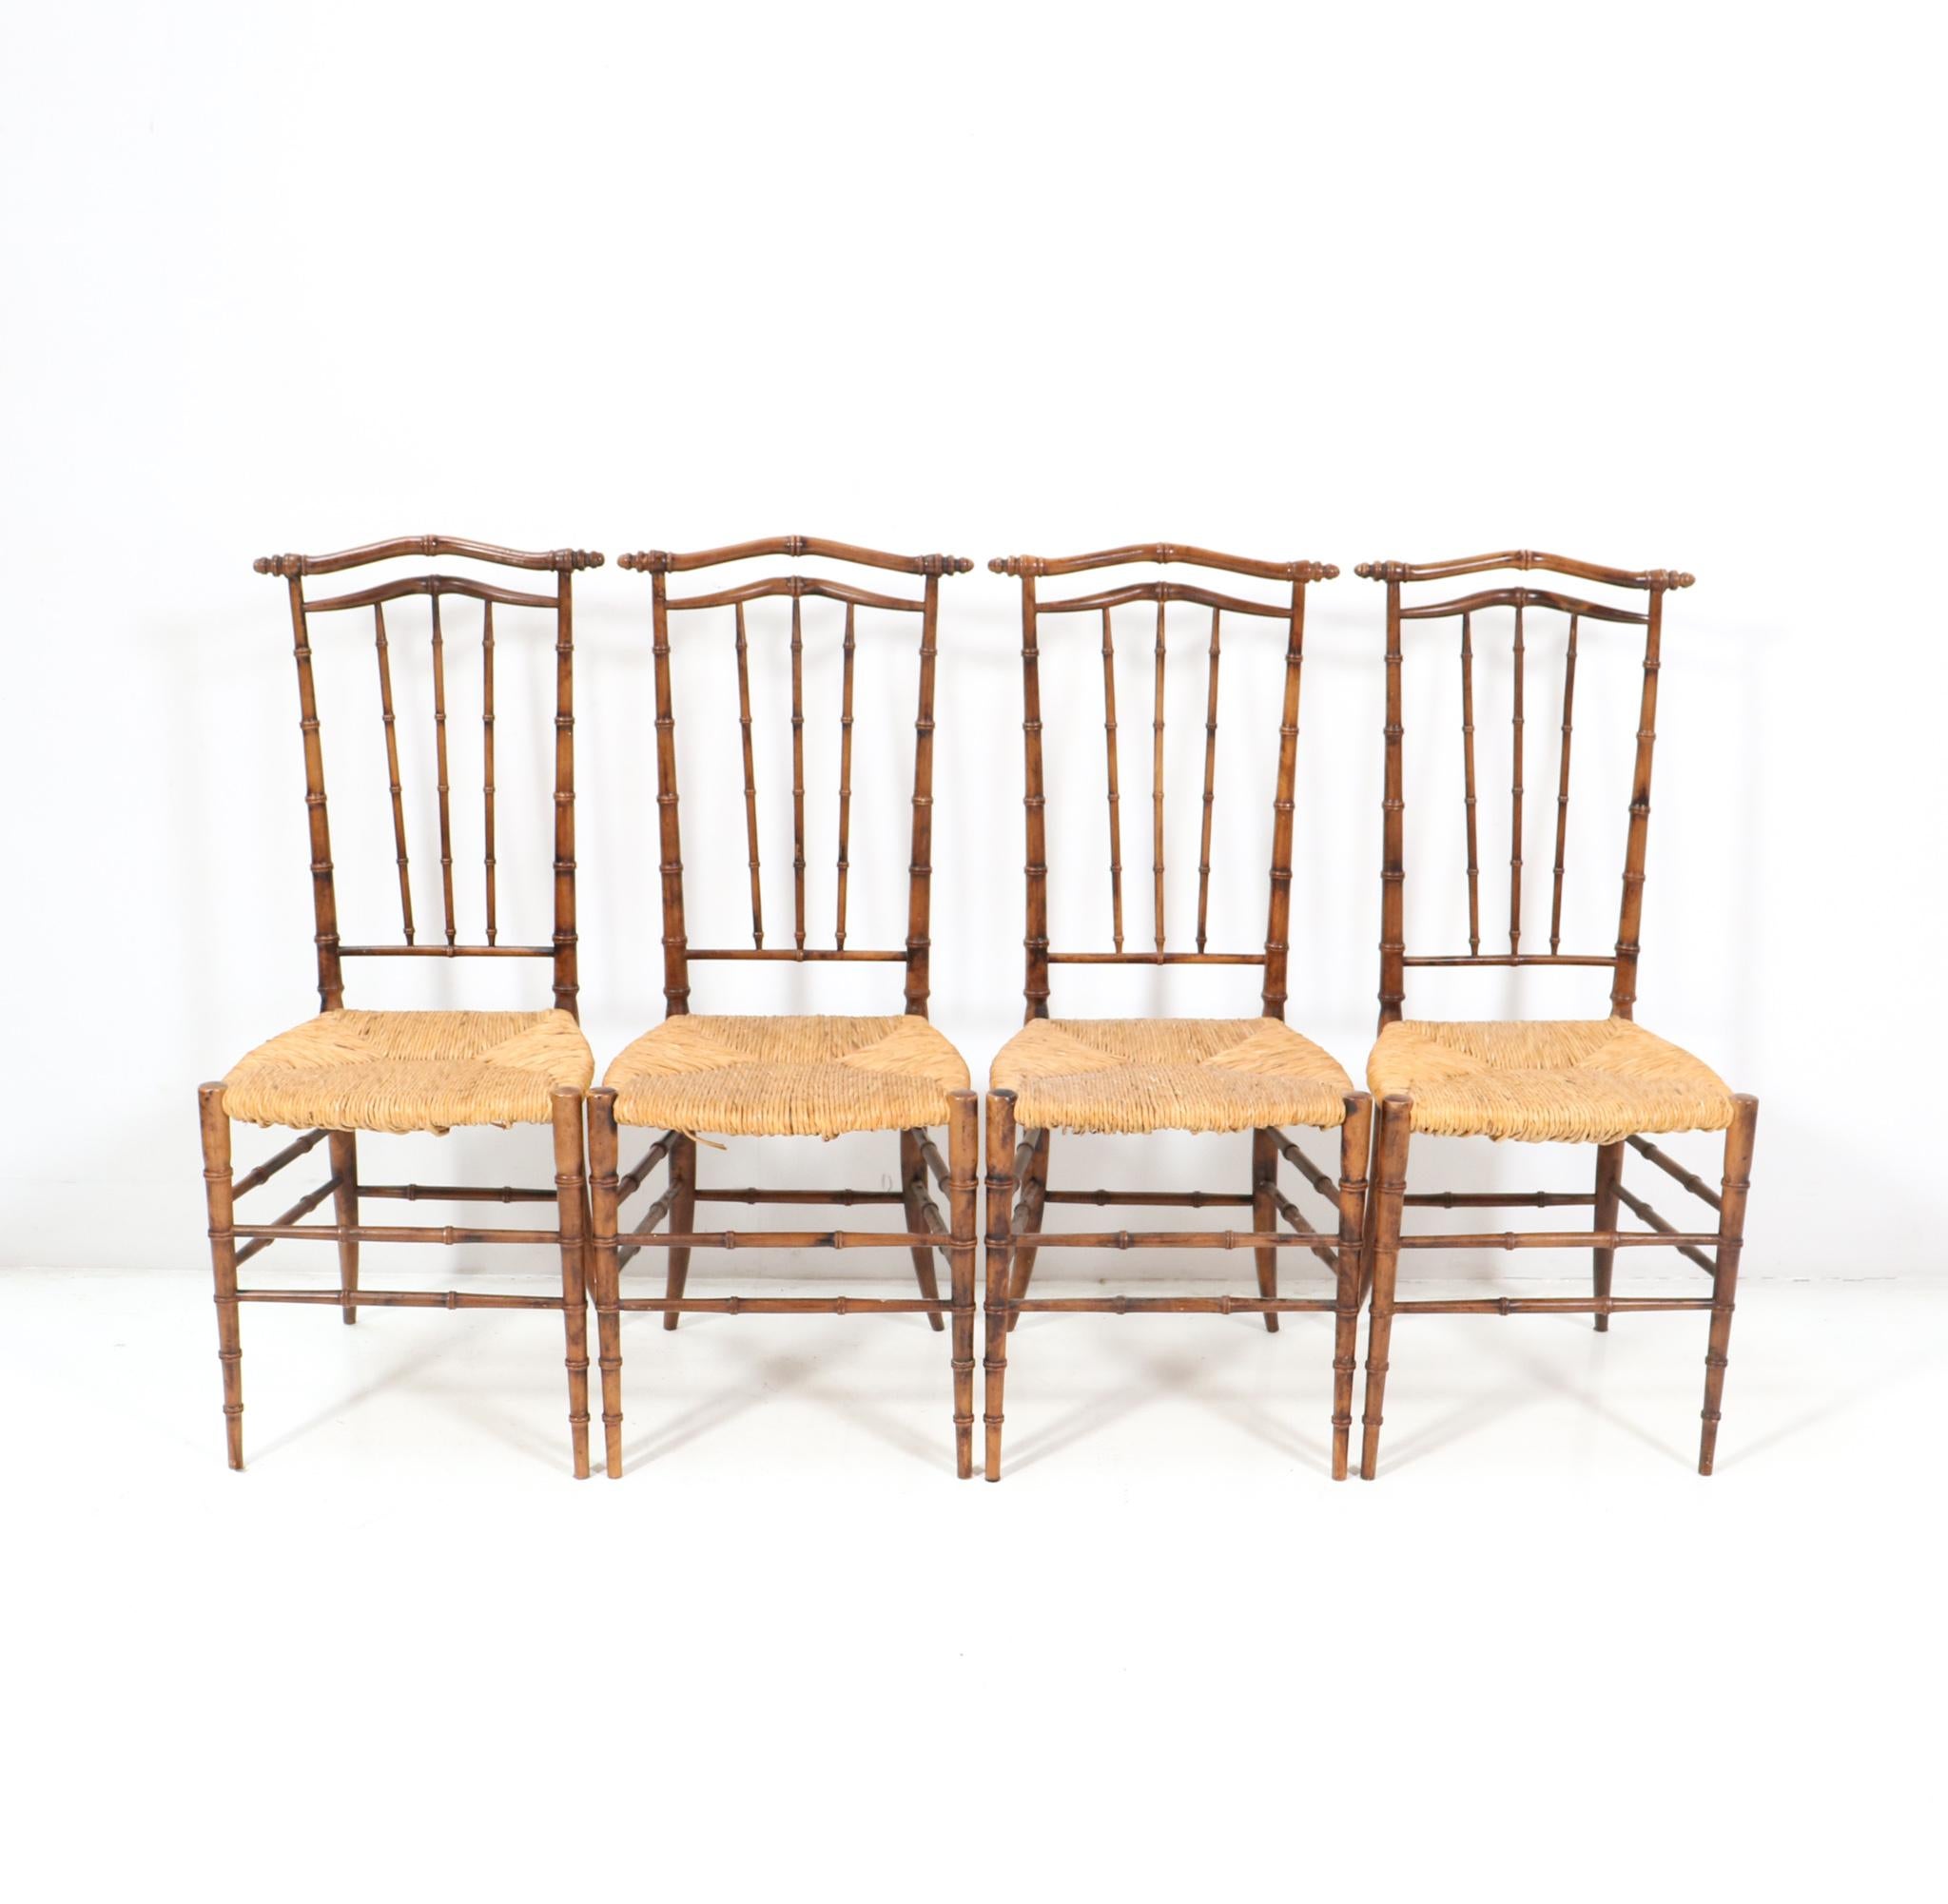 Magnificent and rare set of four Mid-Century Modern dining room chairs.
Striking Dutch design from the 1970s.
Solid stained beech faux bamboo frames with original rush seats.
This wonderful set of four Mid-Century Modern high back dining room chairs